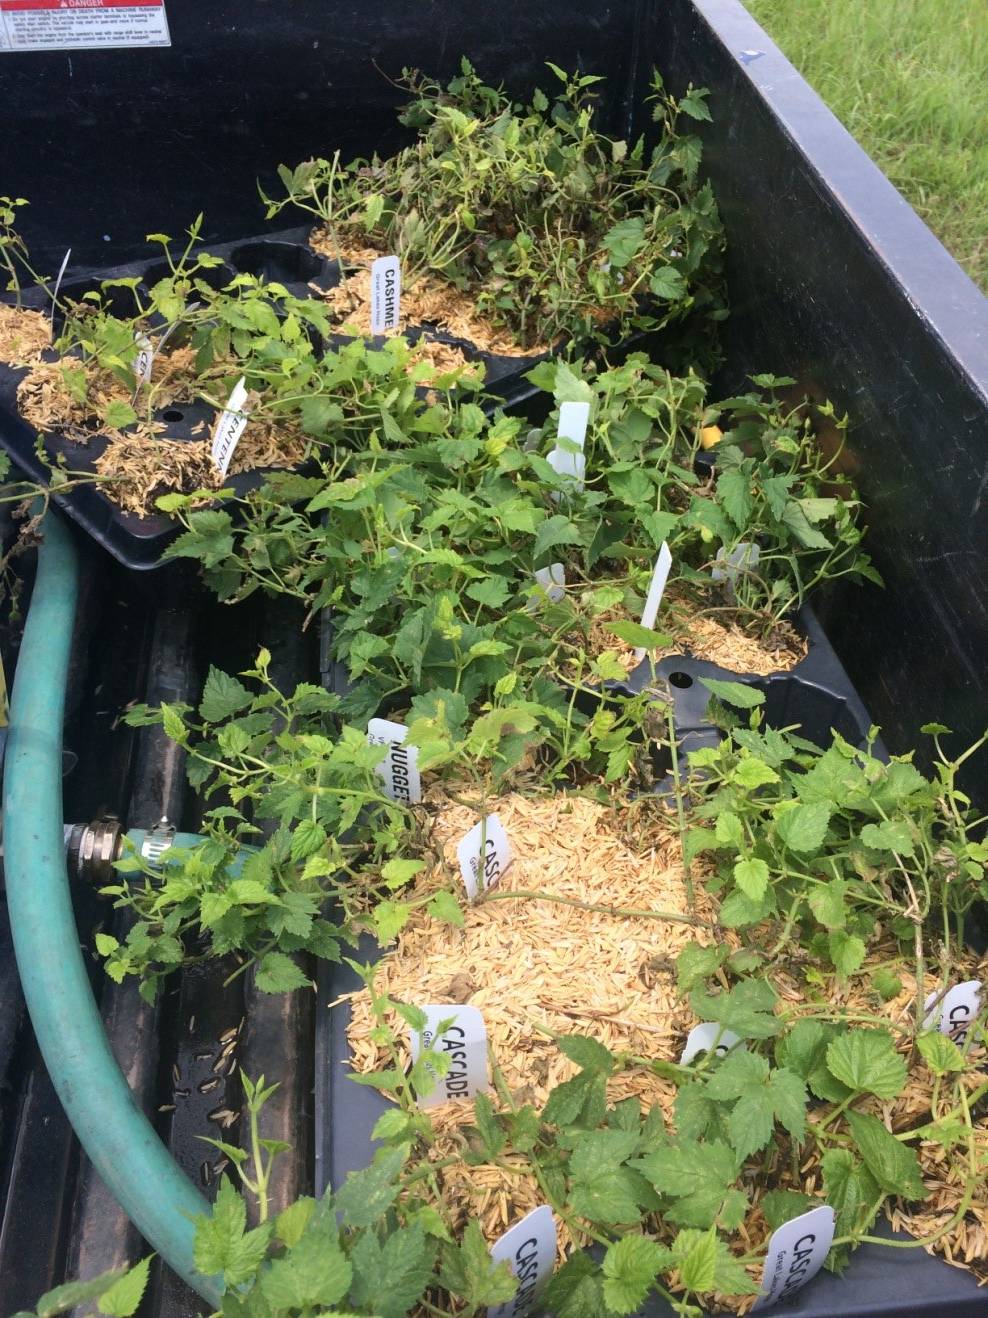 Photo of different varieties of hop plug plants in buckets prior to being transplanted